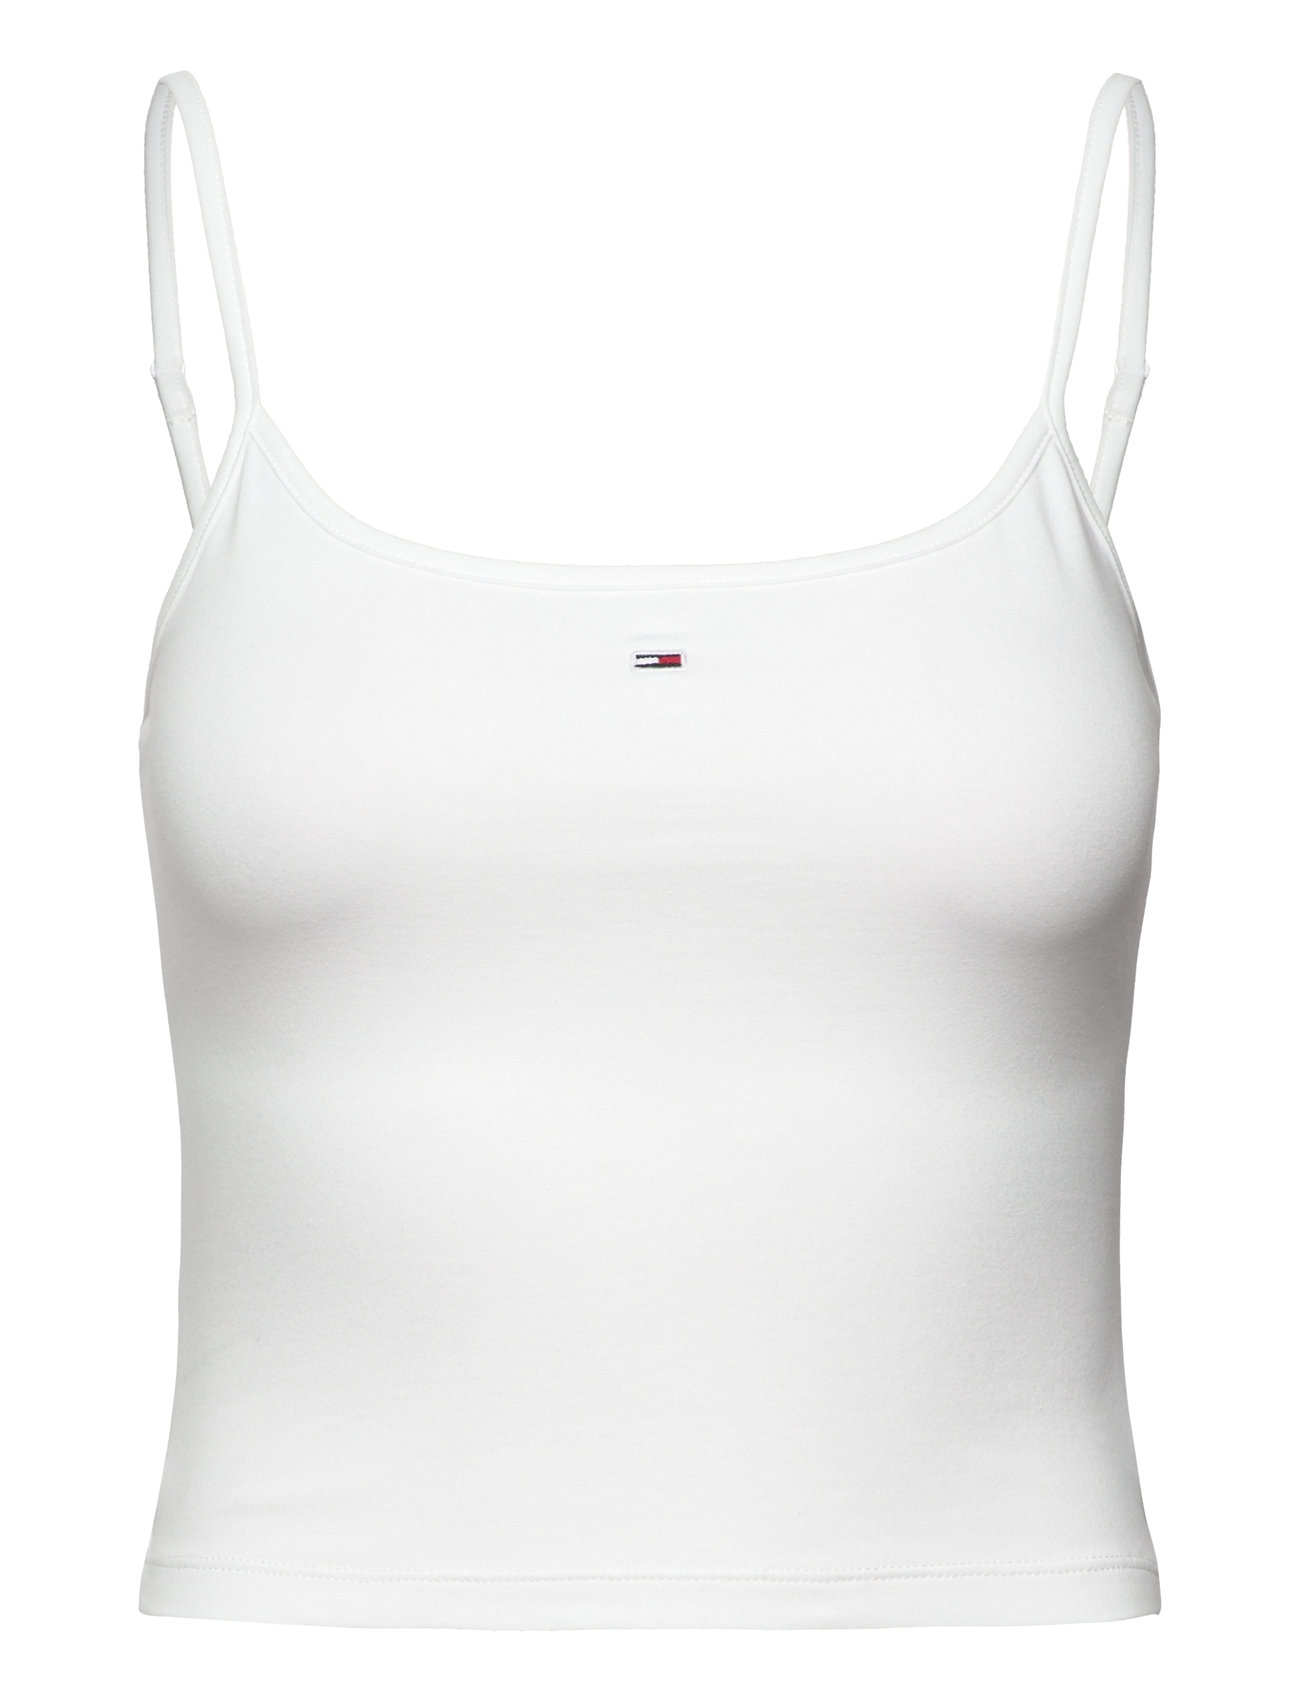 Tjw Crp Essential Strap Top Tops T-shirts & Tops Sleeveless White Tommy Jeans